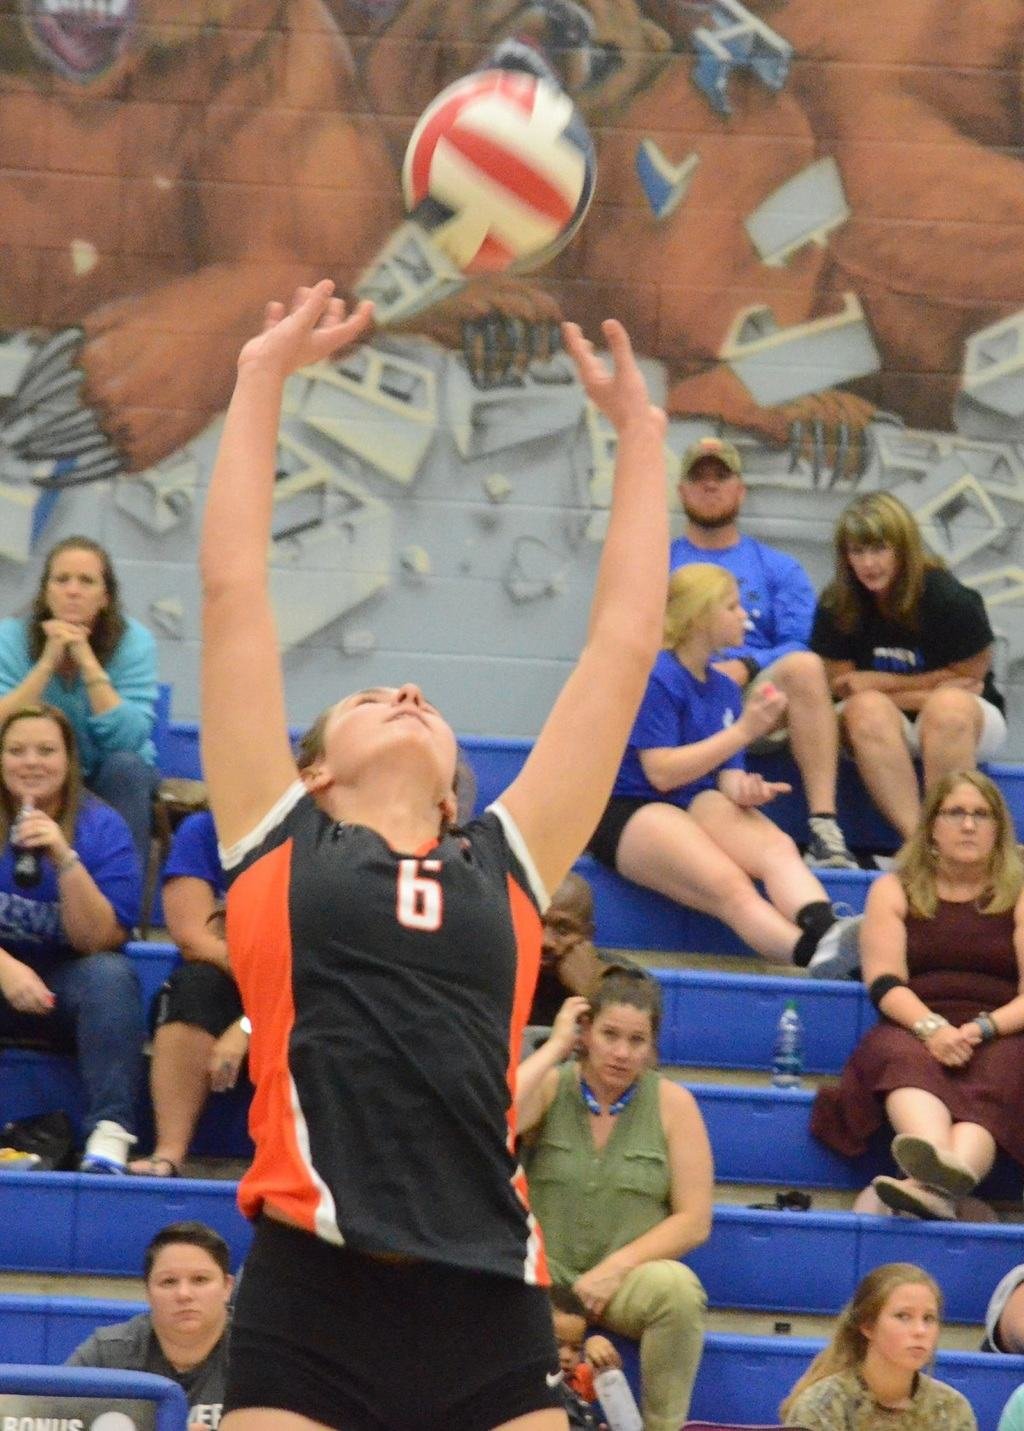 Aledo sophomore setter Sarah Morehead sets up a hitter Tuesday night during the Ladycats' sweep of Brewer in a District 6-5A volleyball match at Brewer.